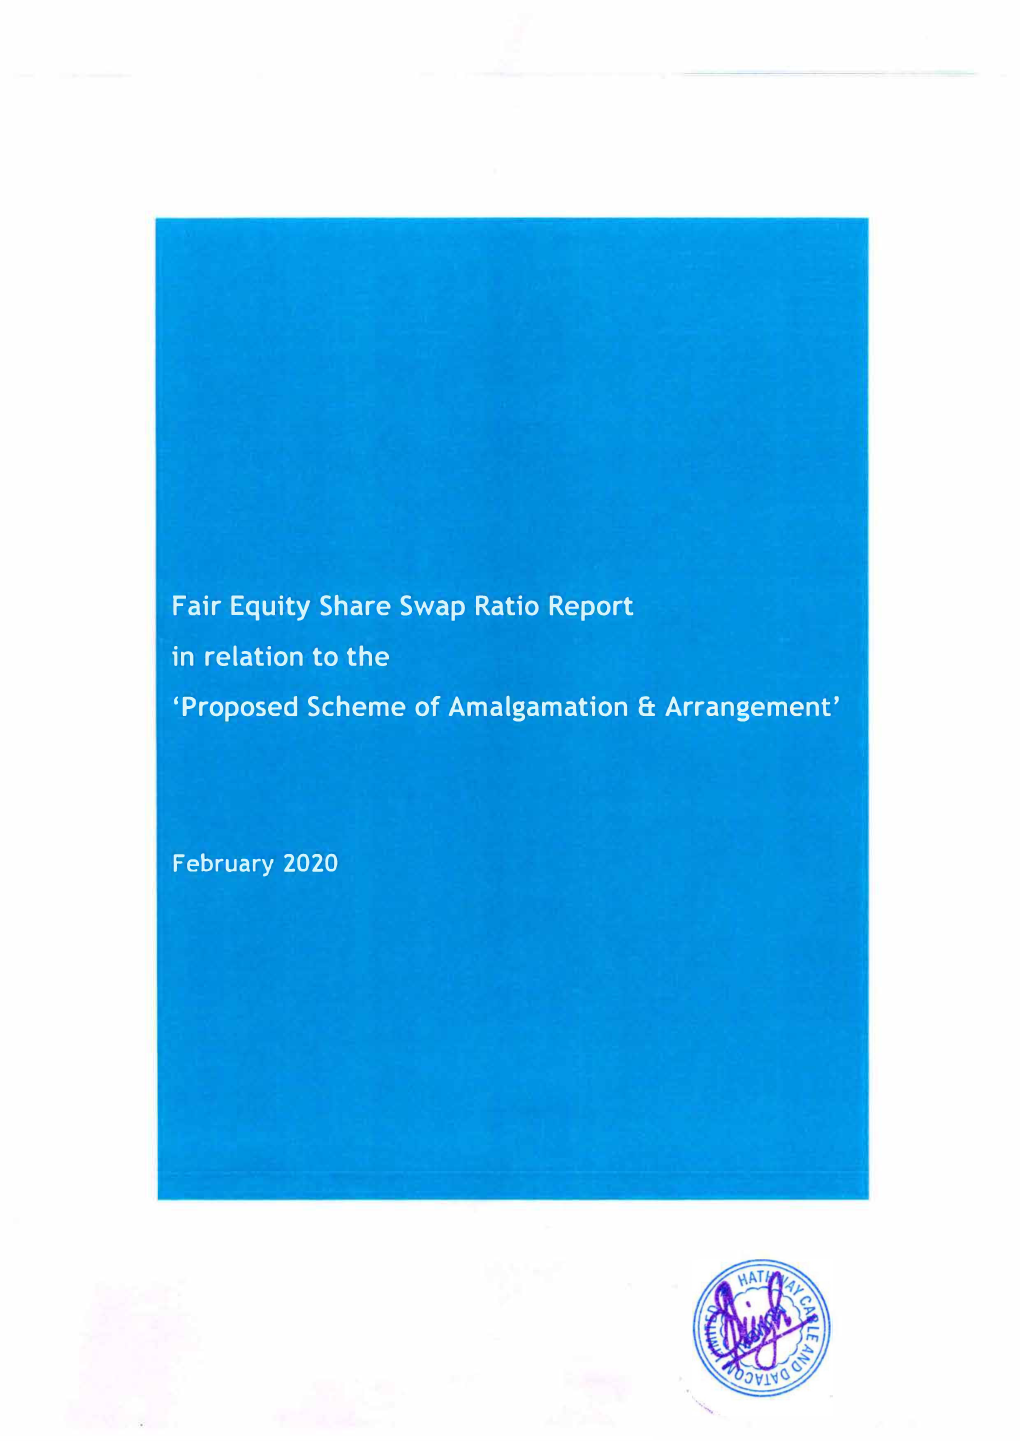 Fair Equity Share Swap Ratio Report in Relation to the 'Proposed Scheme of Amalgamation & Arrangement'